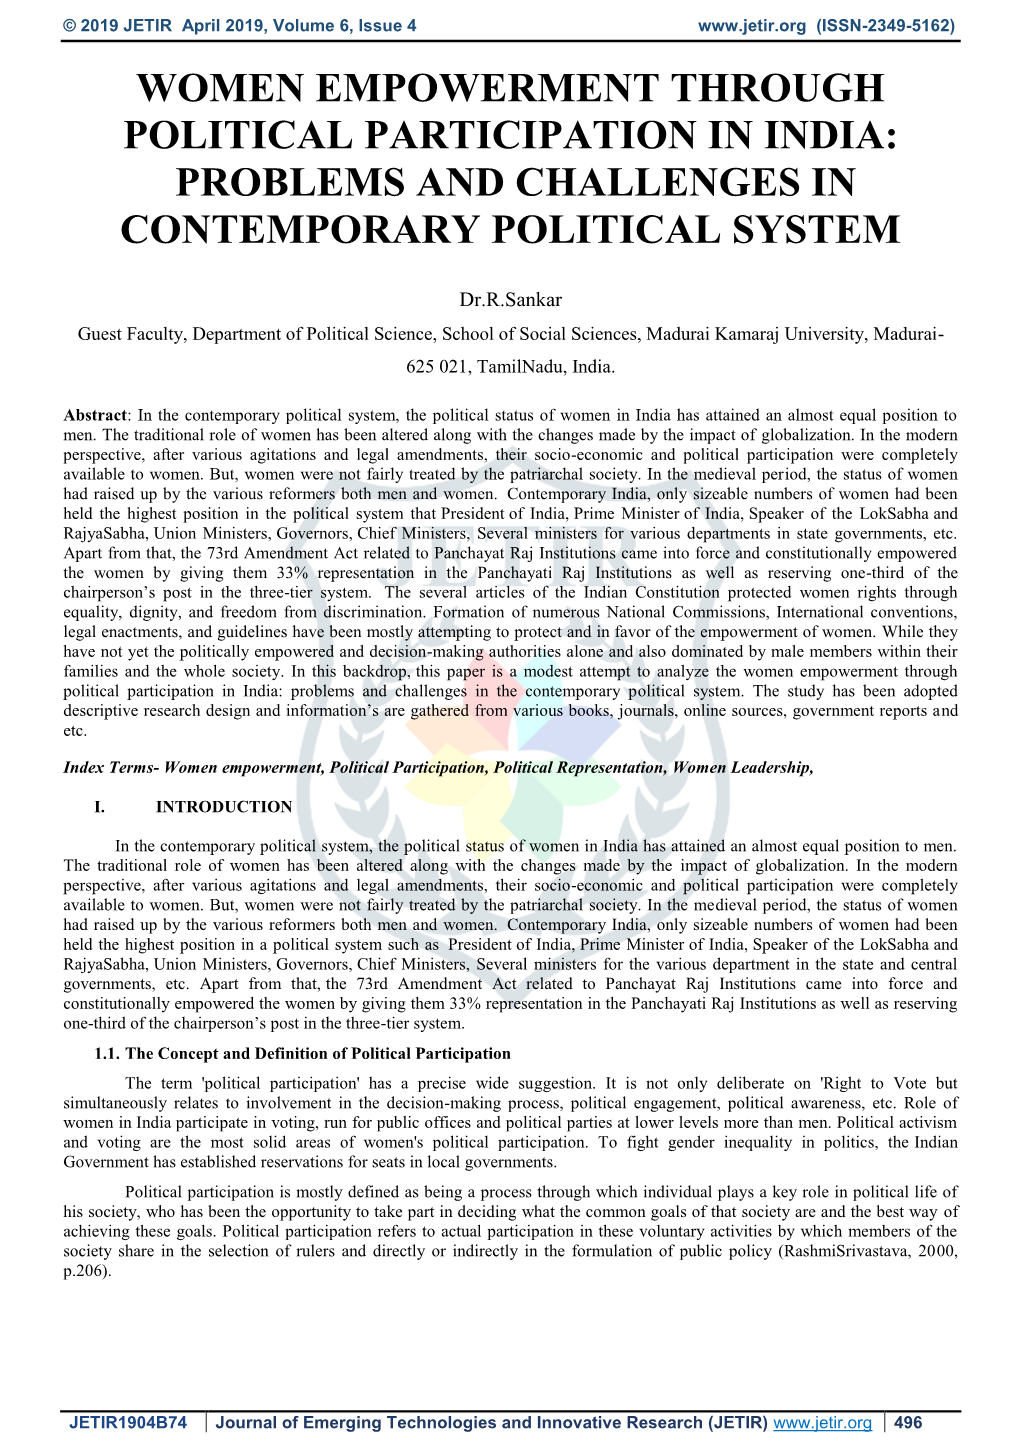 Women Empowerment Through Political Participation in India: Problems and Challenges in Contemporary Political System